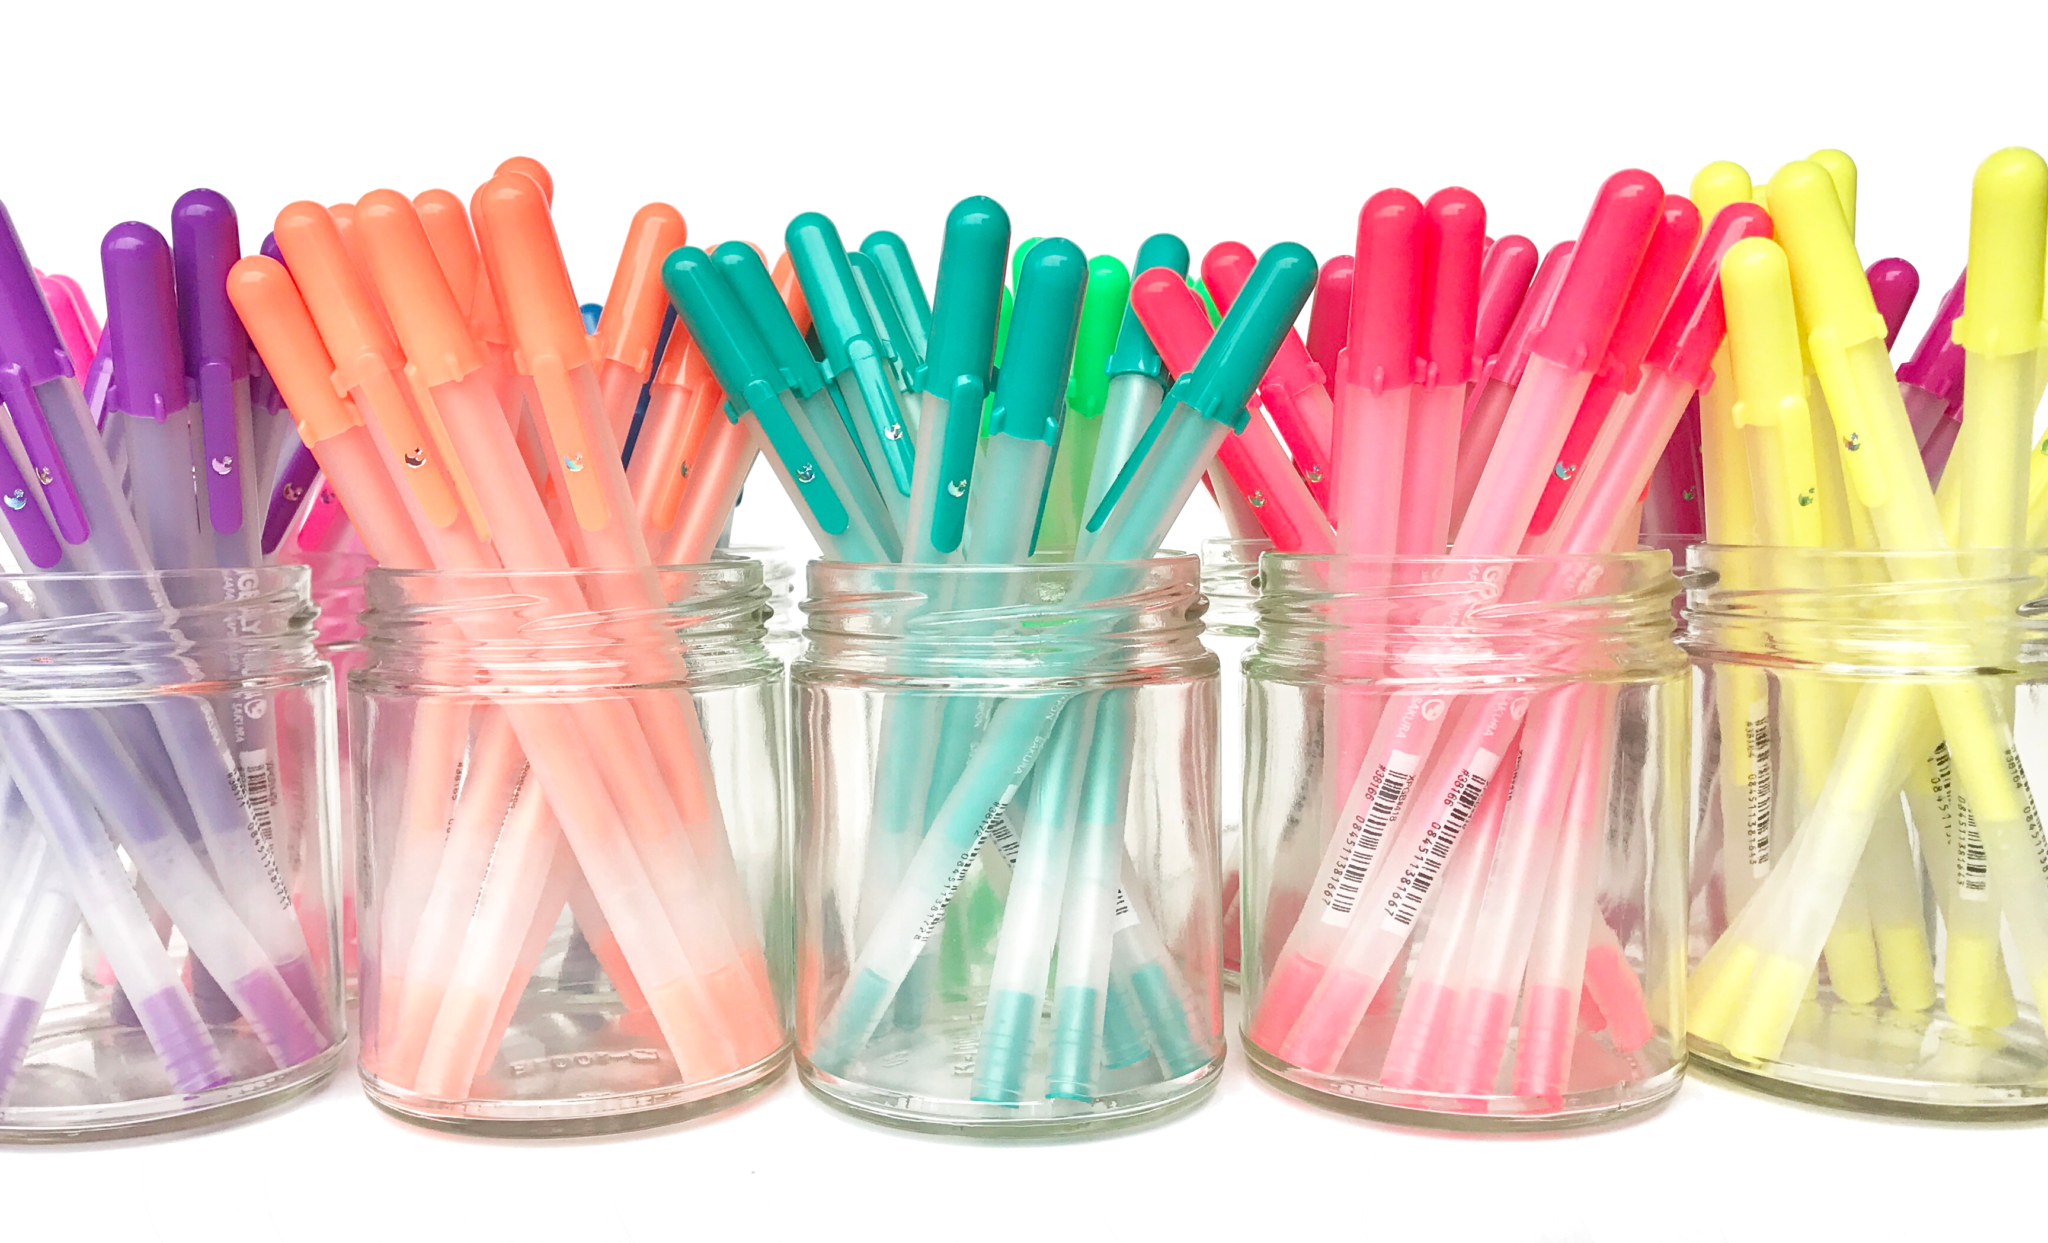 Colored gel pens organized in glass containers on white background